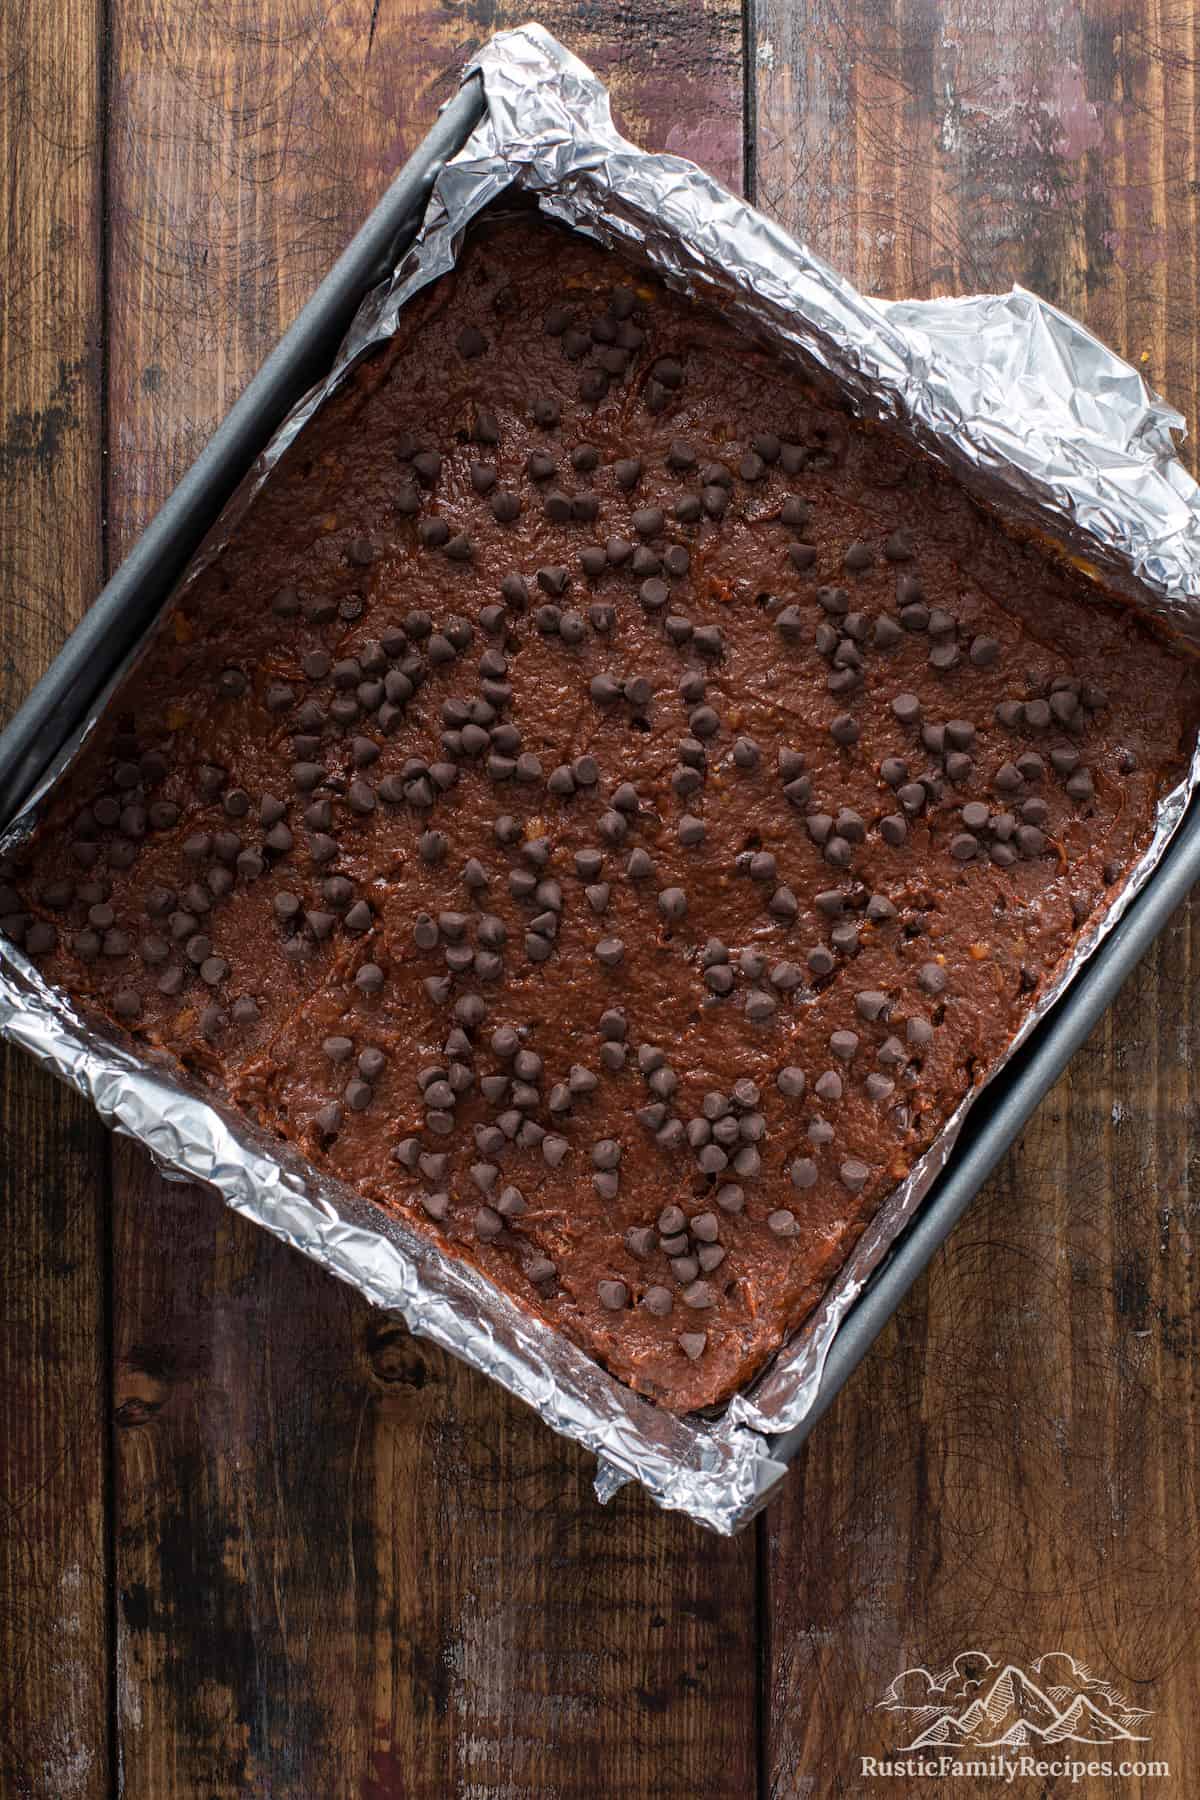 Brownie batter in a pan ready to bake